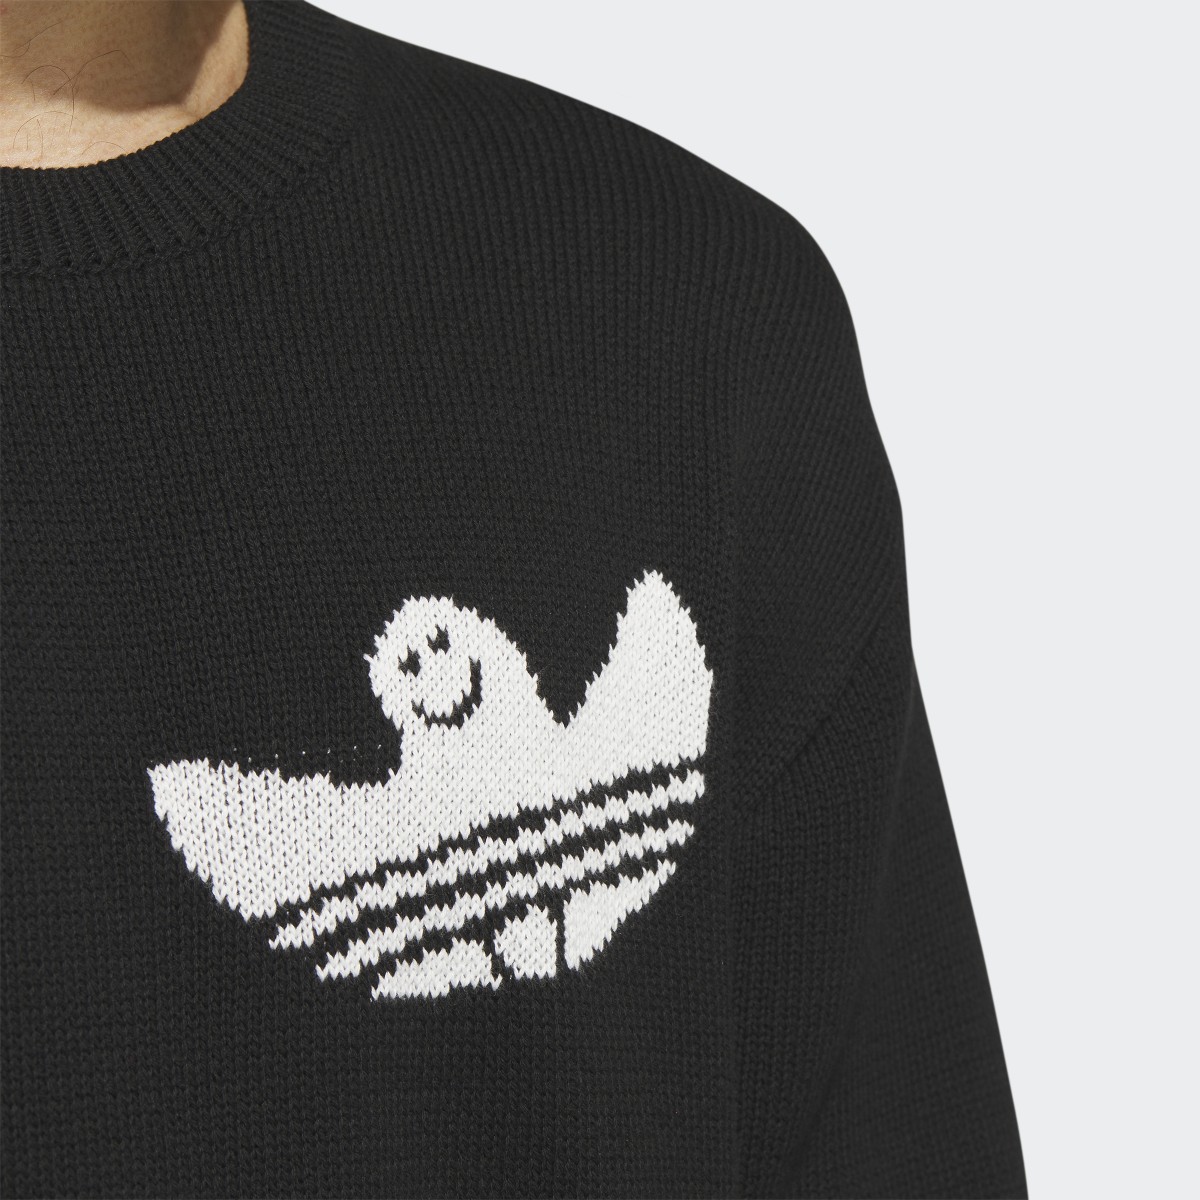 Adidas Shmoofoil Knit Sweater (Gender Neutral). 7